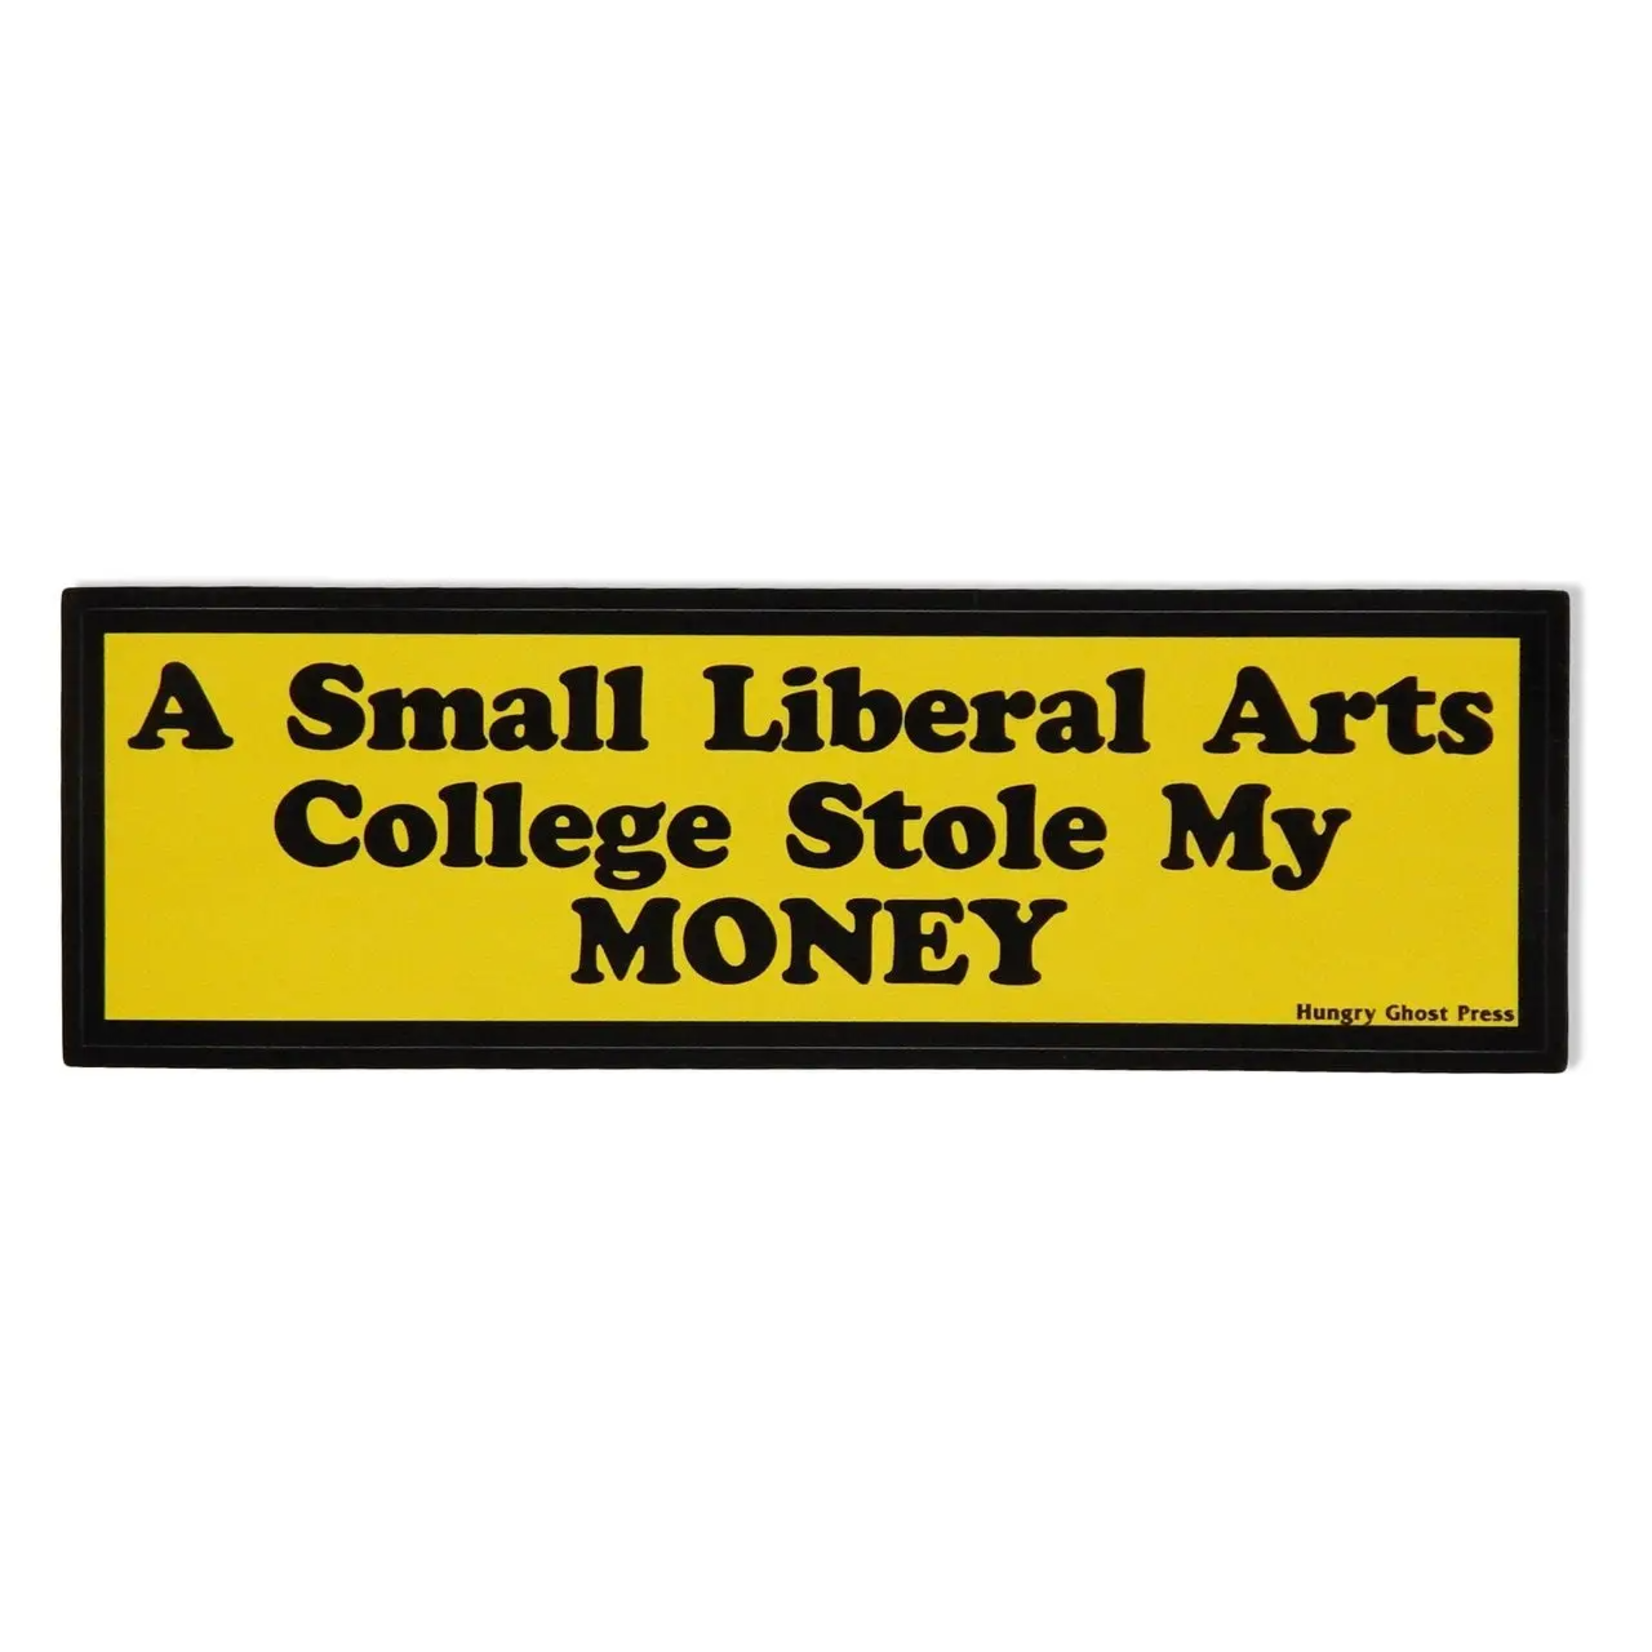 Hungry Ghost Press College Theft Bumper Sticker